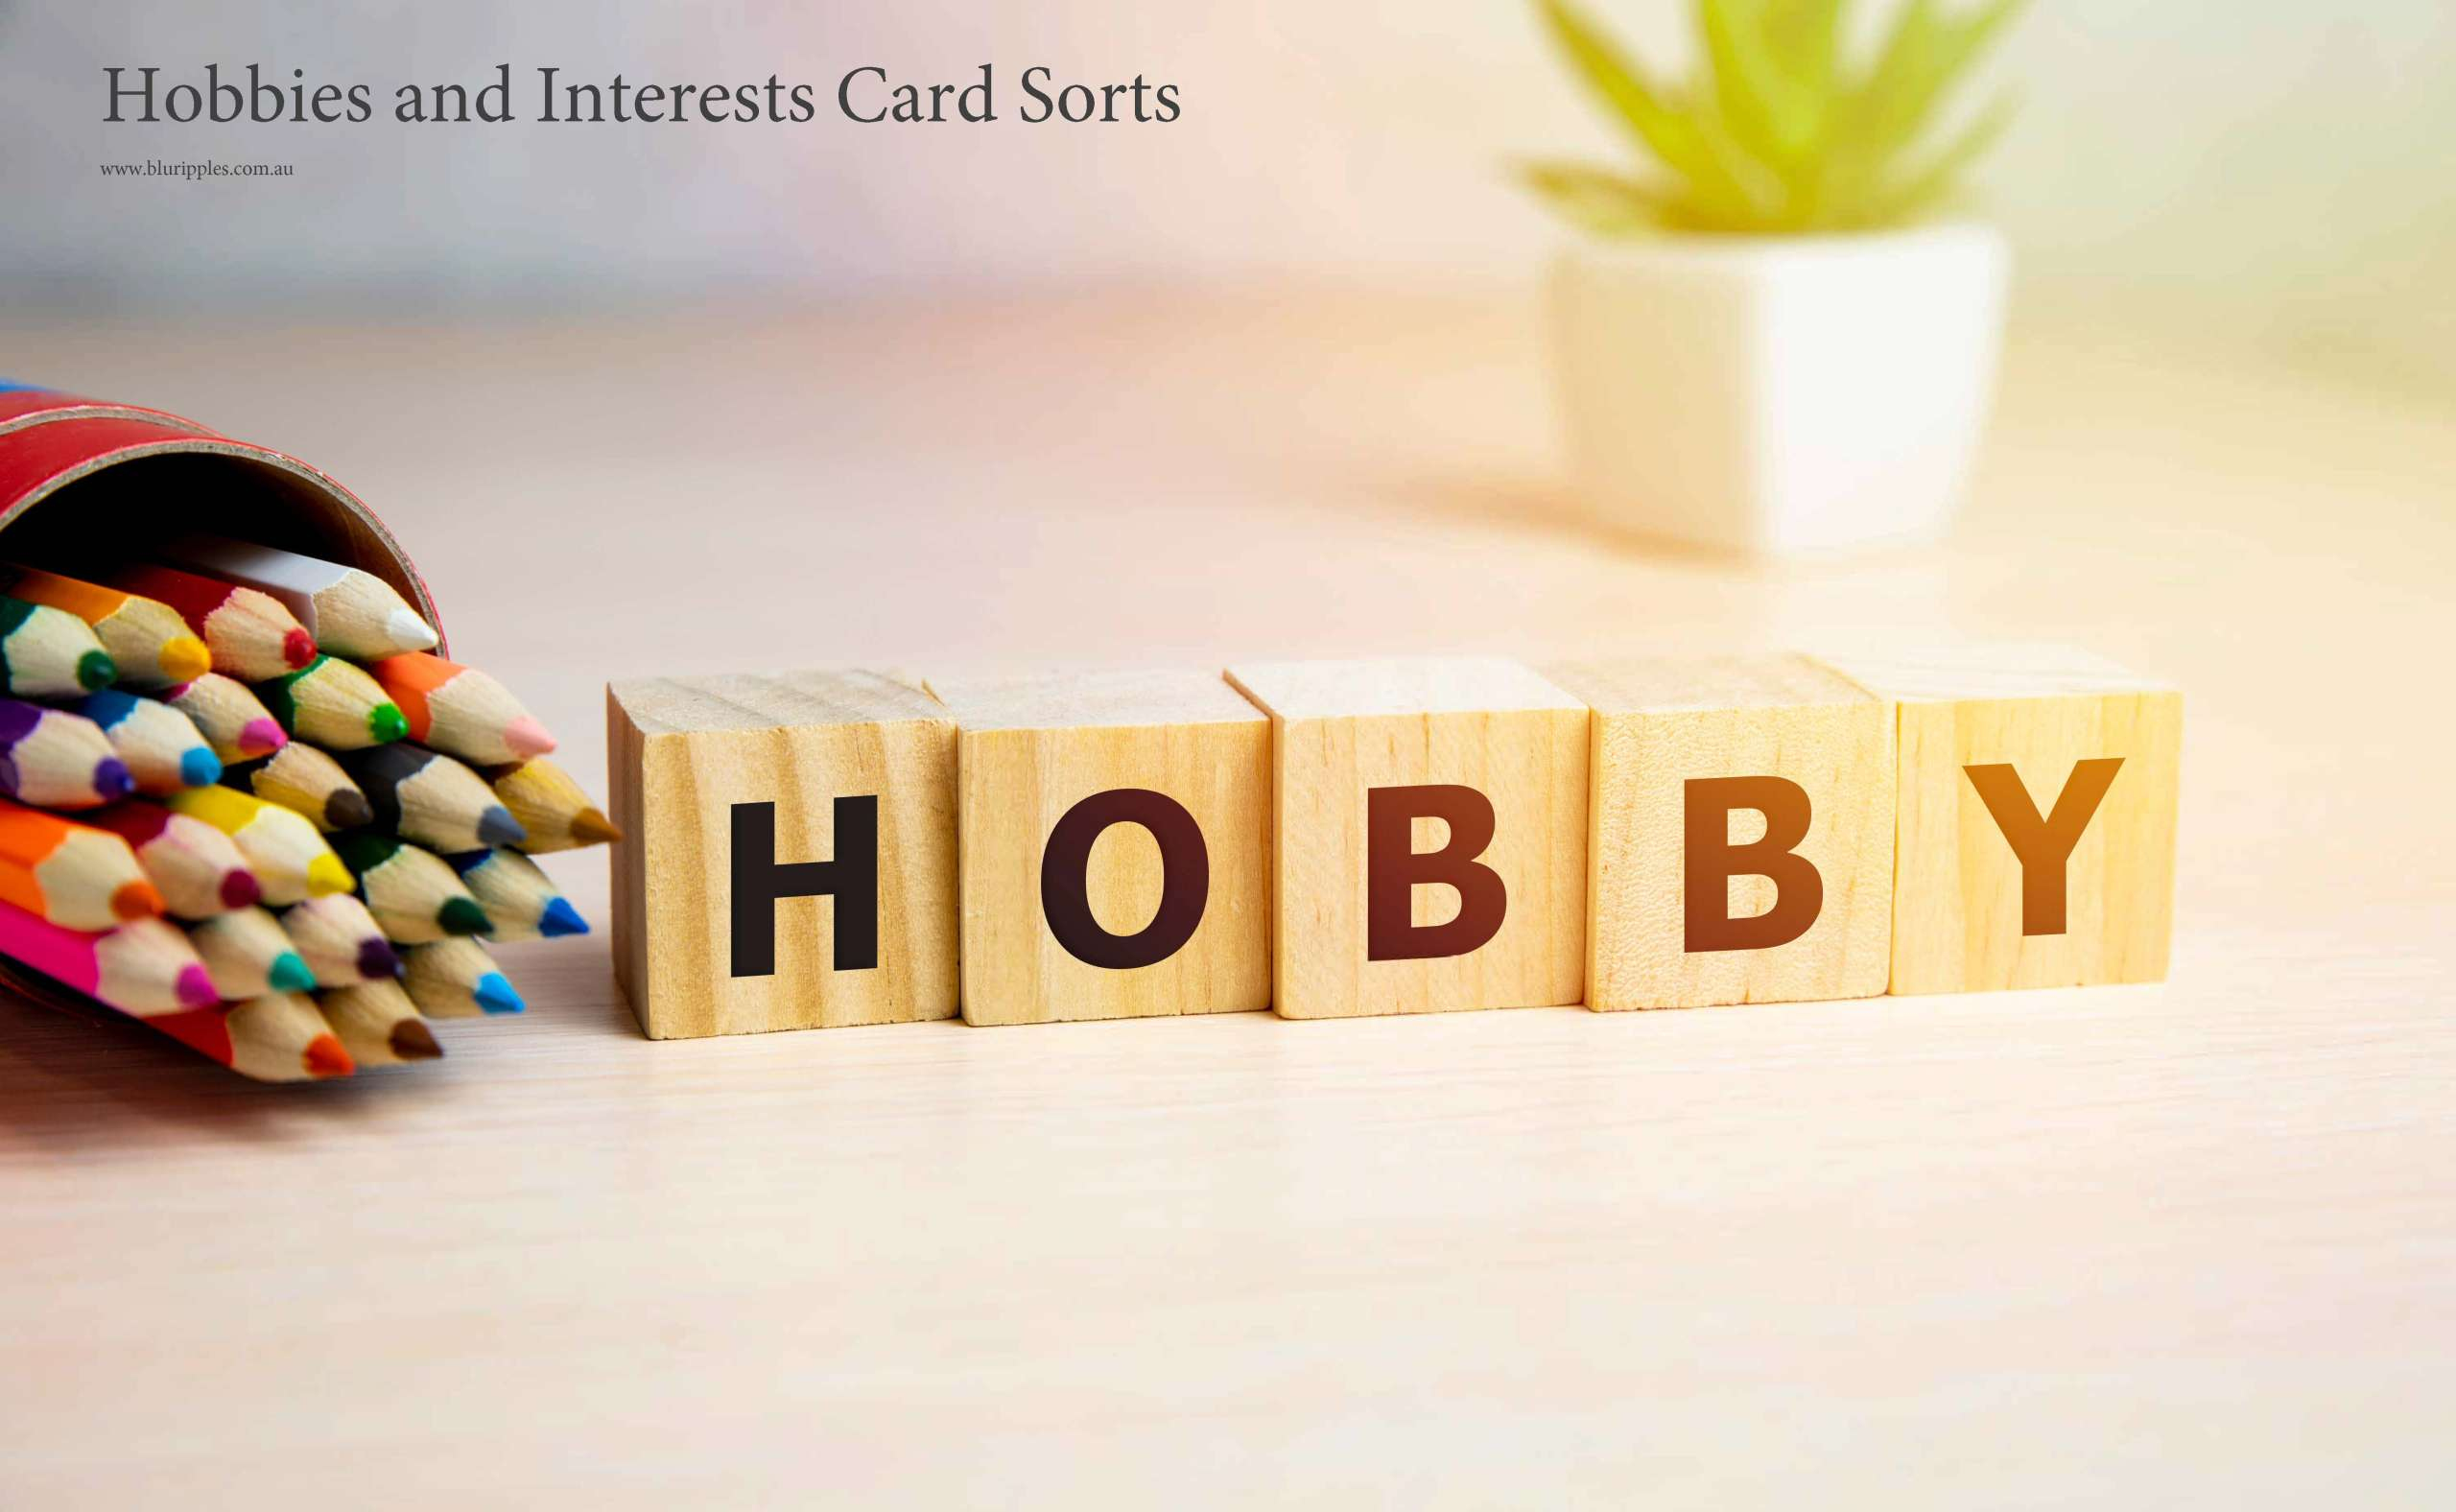 Hobbies and Interests Card Sorts